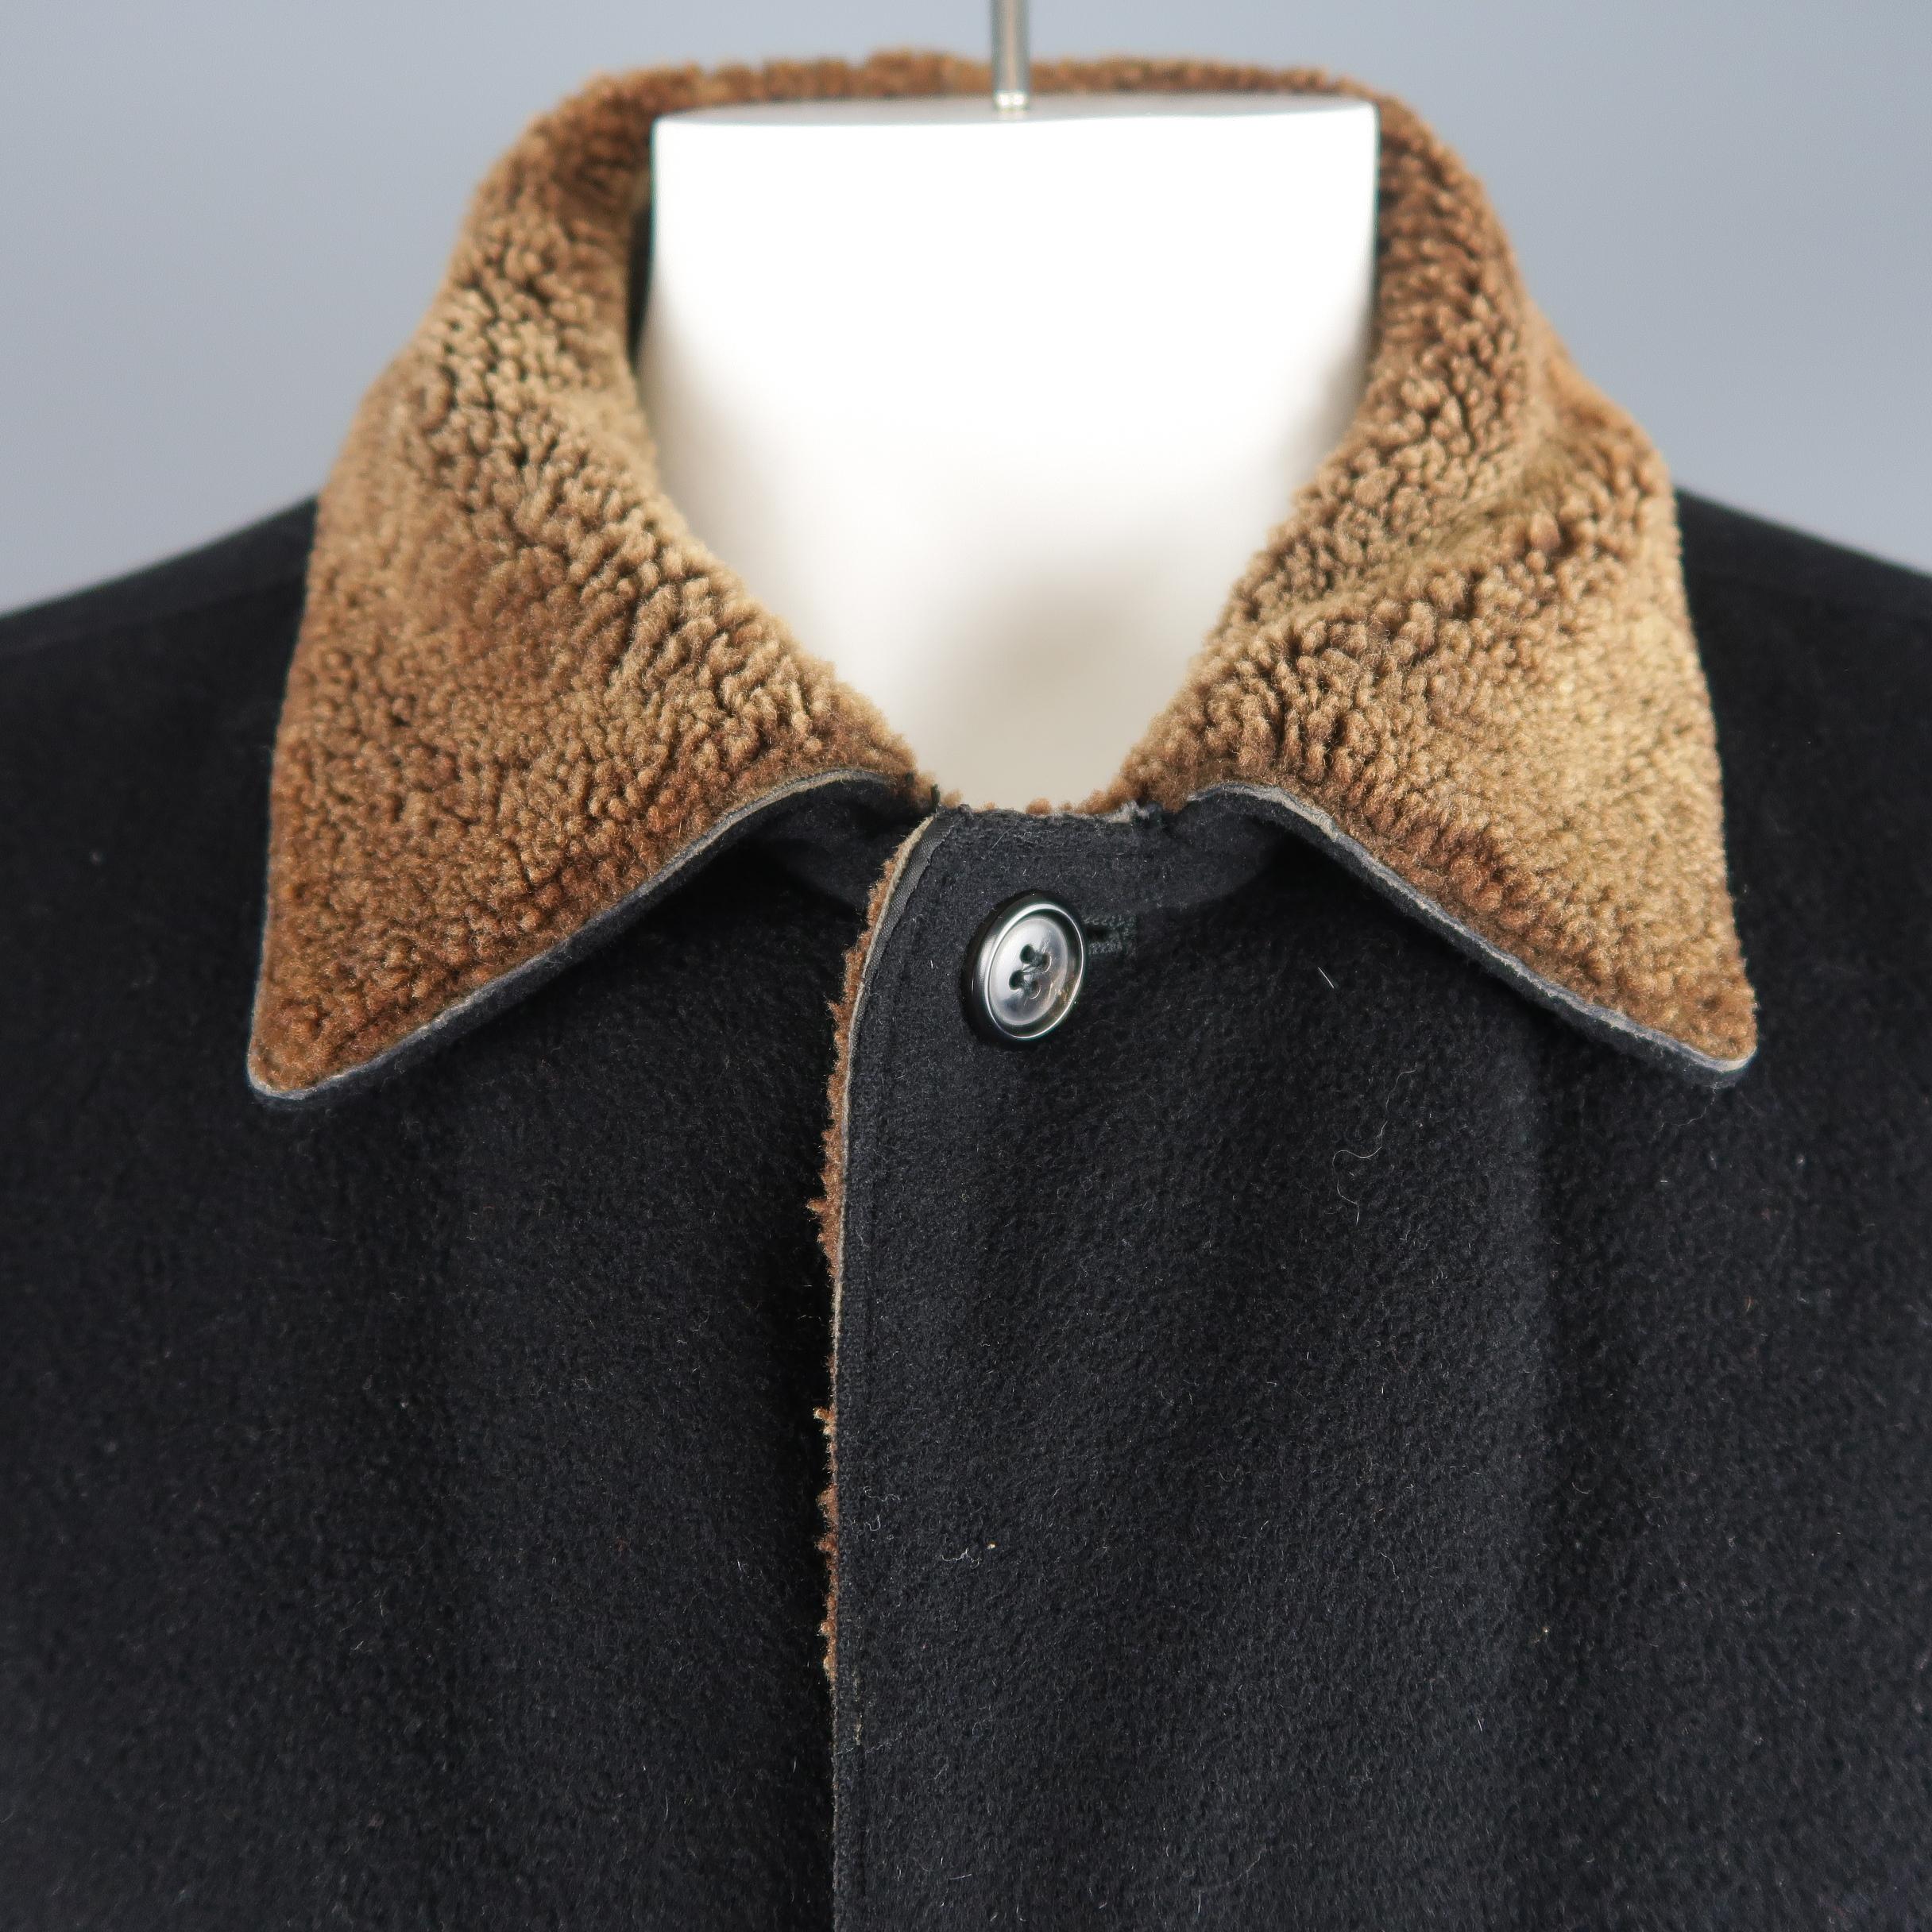 Barney's New York car coat comes in black wool with  button up front, slanted pockets and brown faux shearling collar and liner. Wear on shearling. As-is. Made in Italy.
 
Good Pre-Owned Condition.
Marked: IT 52
 
Measurements:
 
Shoulder: 19